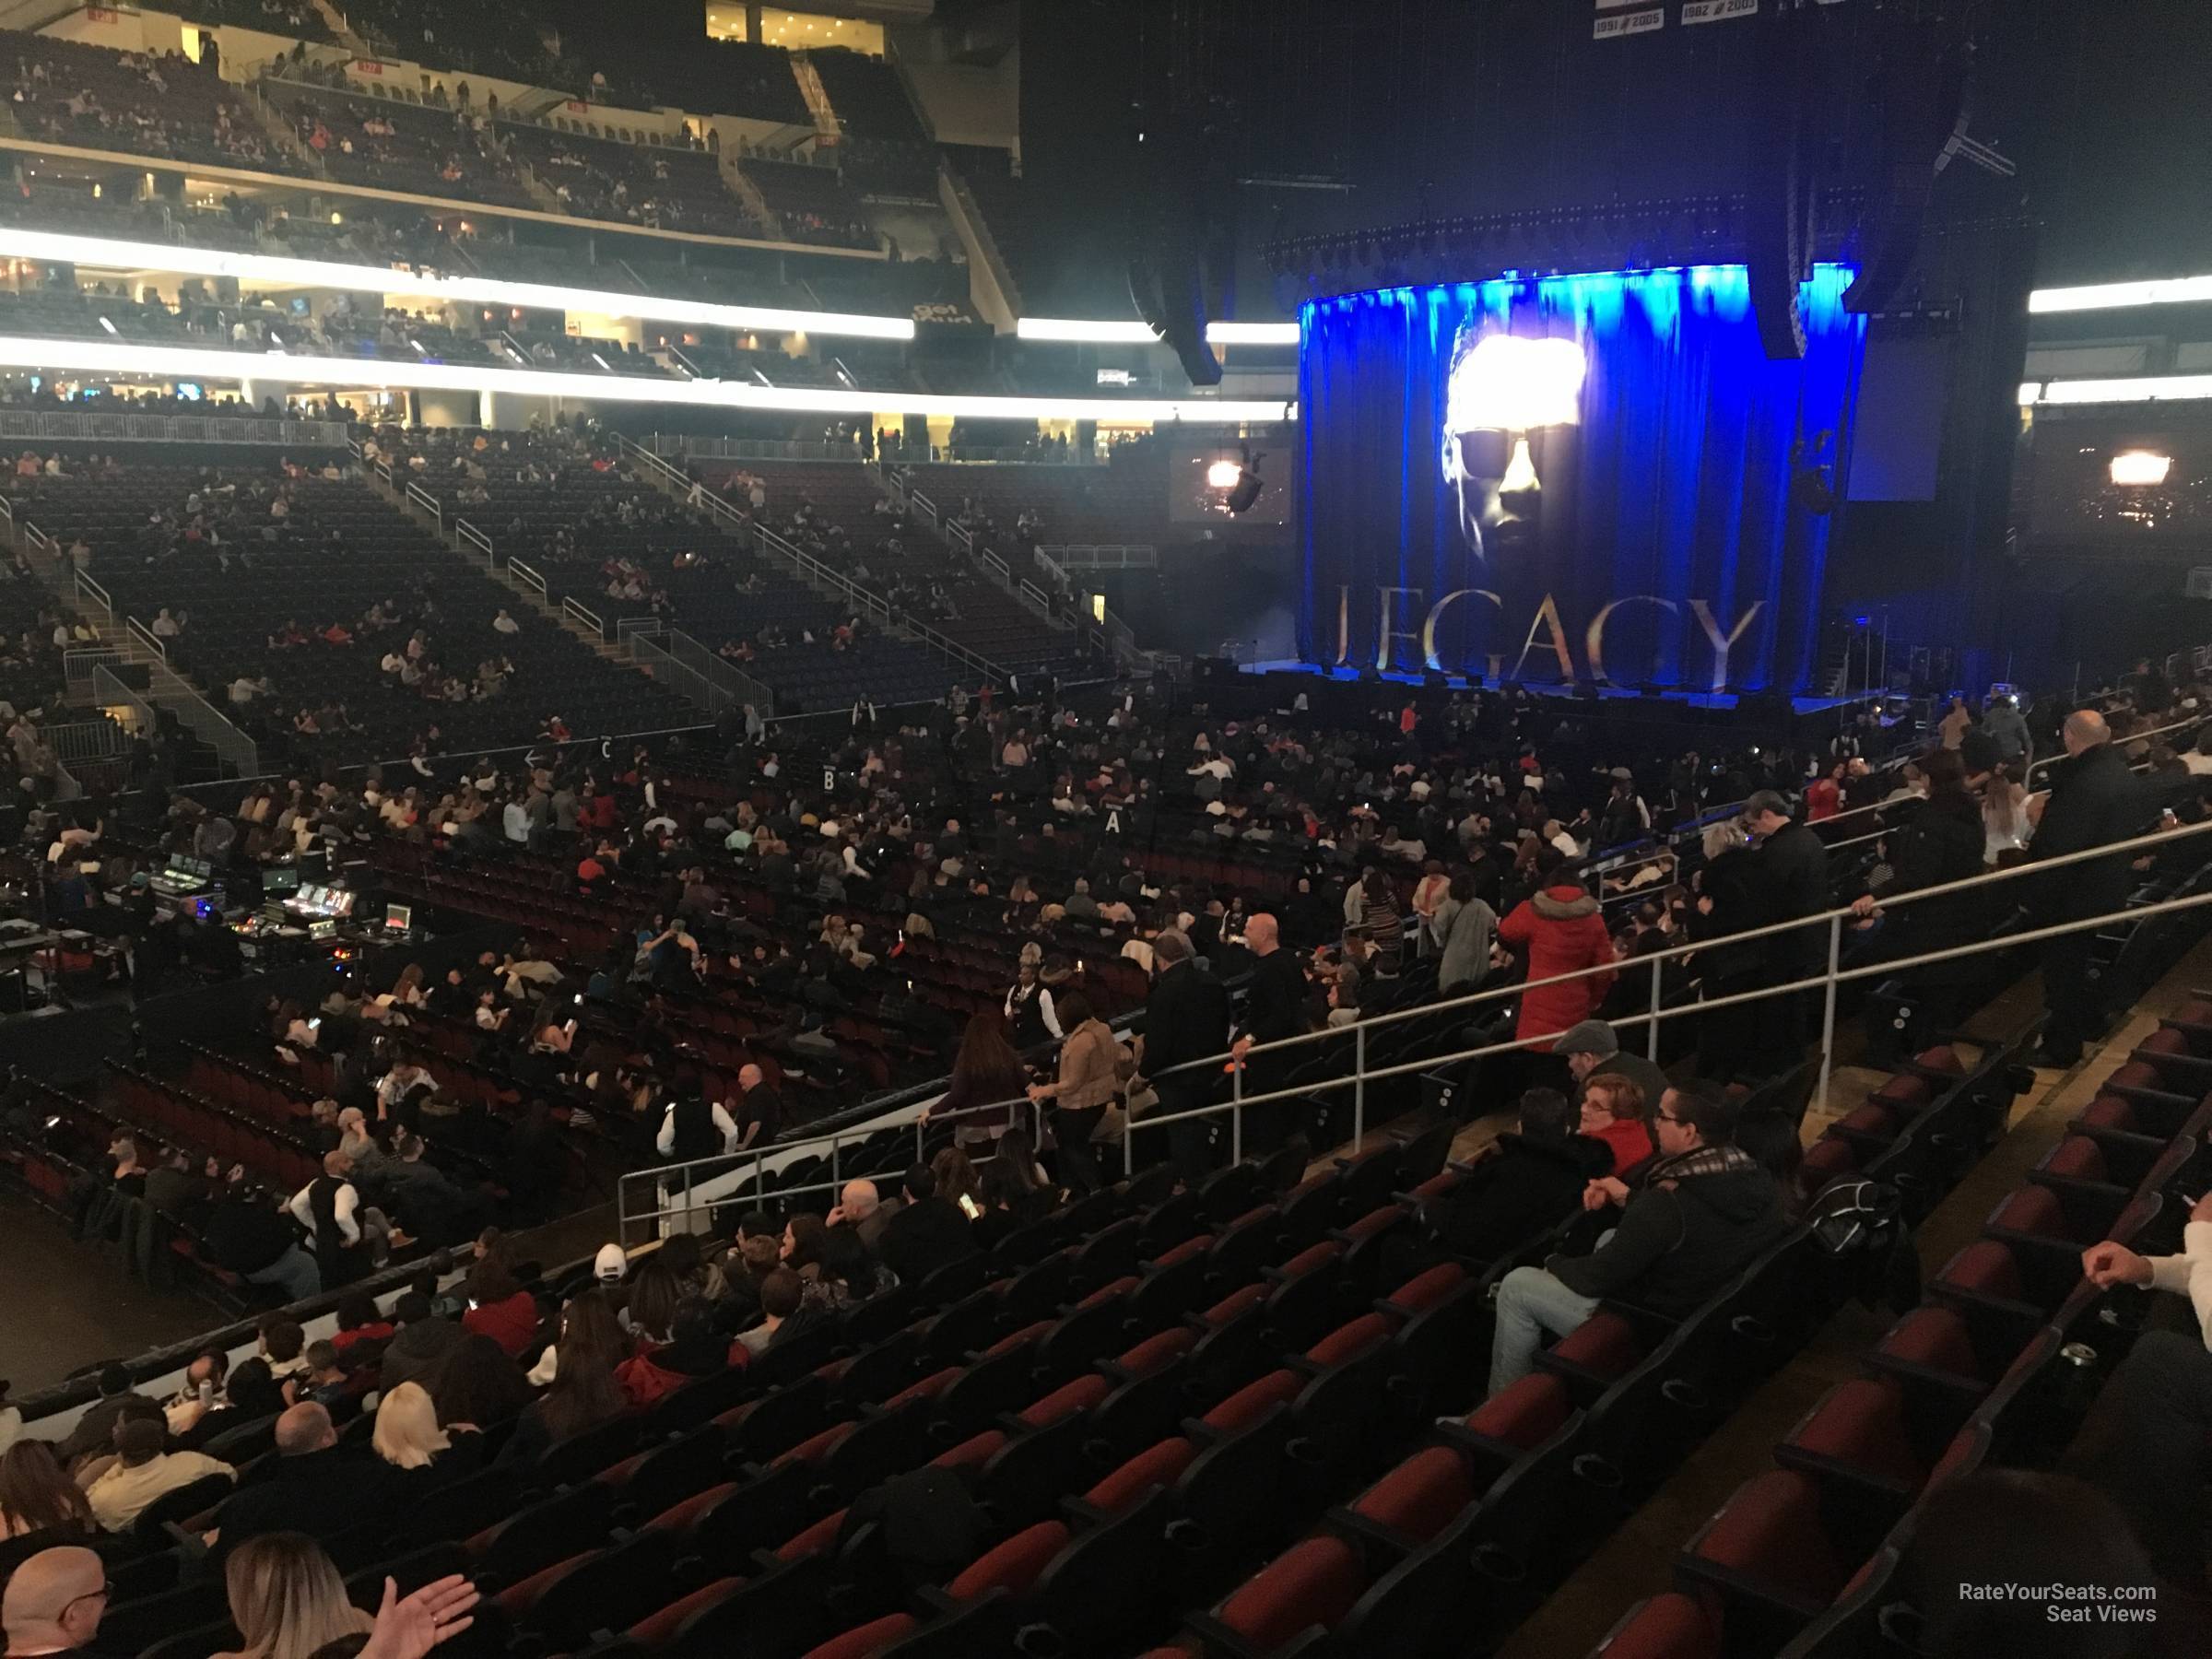 Prudential Center, section 6, row 21, seat 16 - BTS tour: Love Yourself  World Tour, shared by jinnie_k